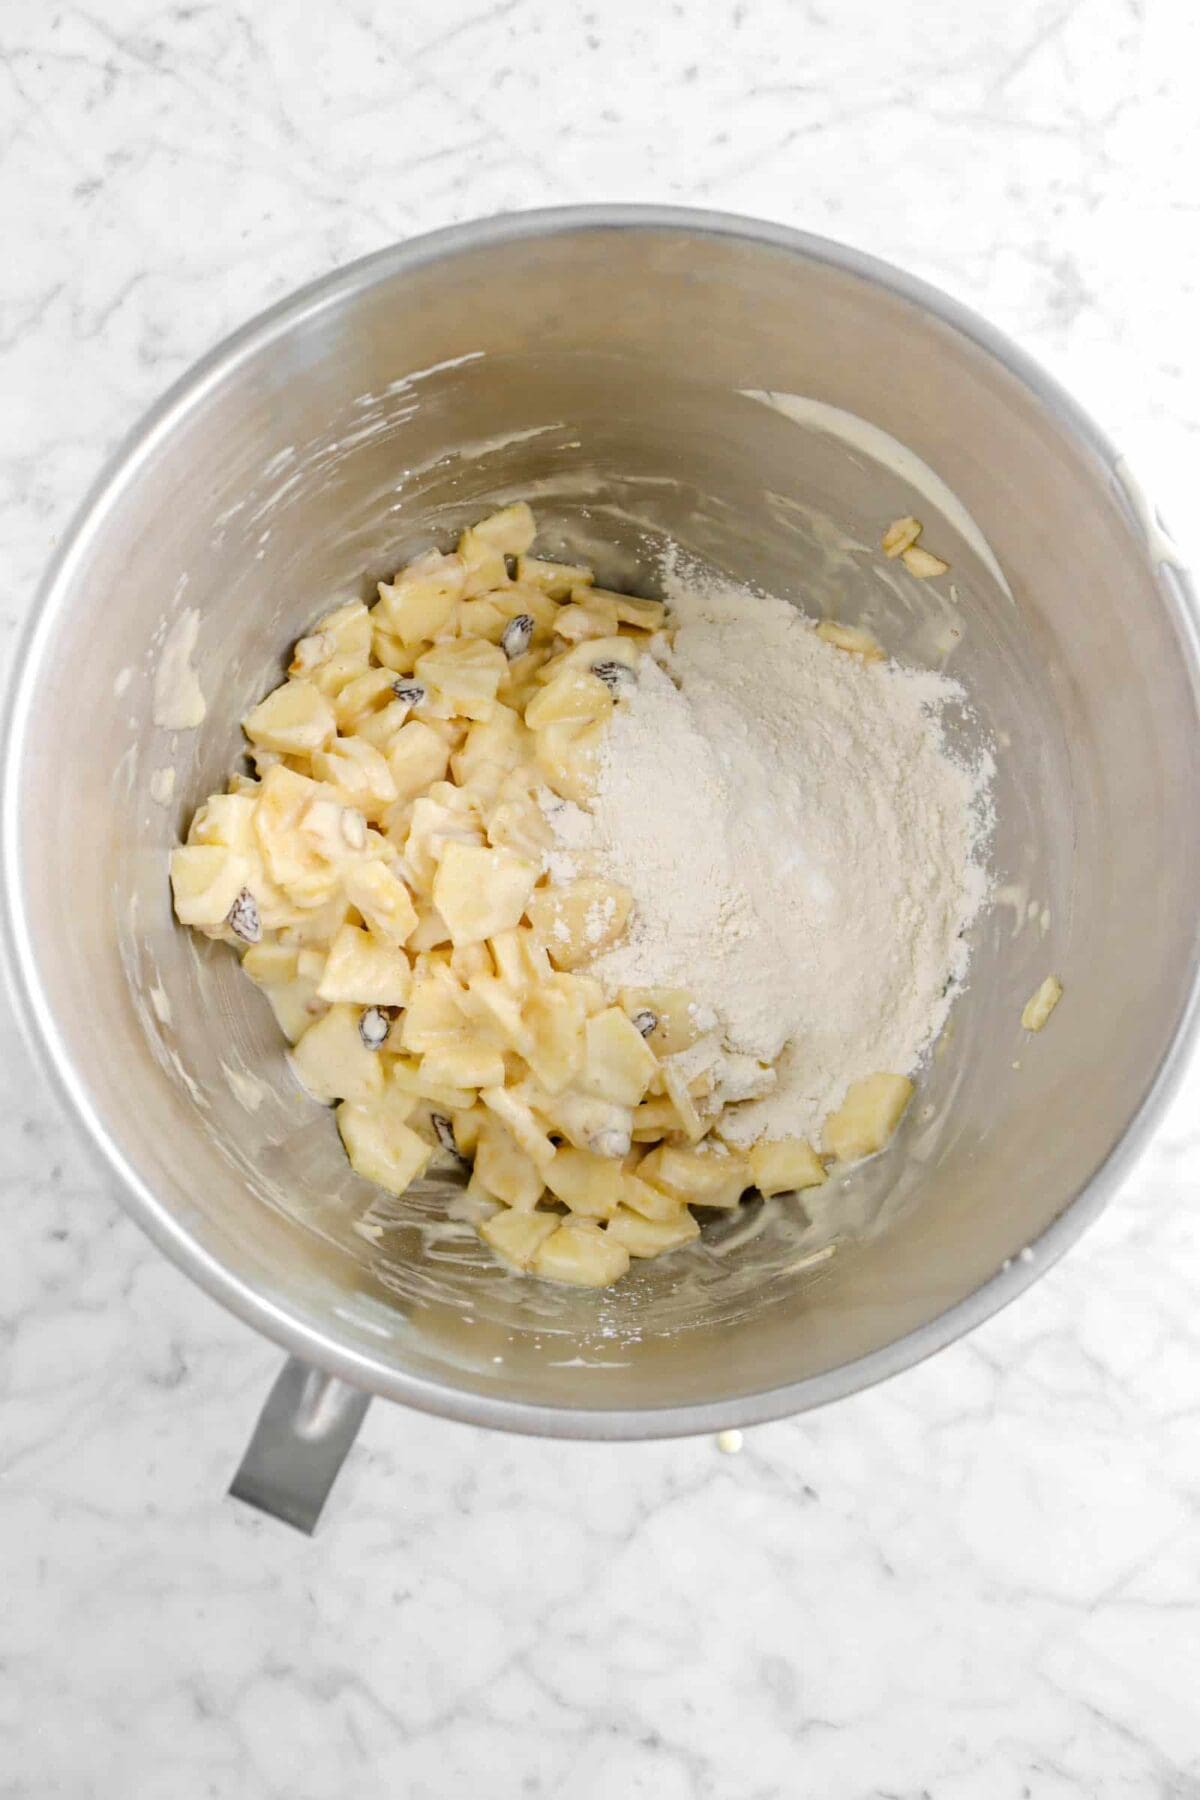 dry ingredients added to batter